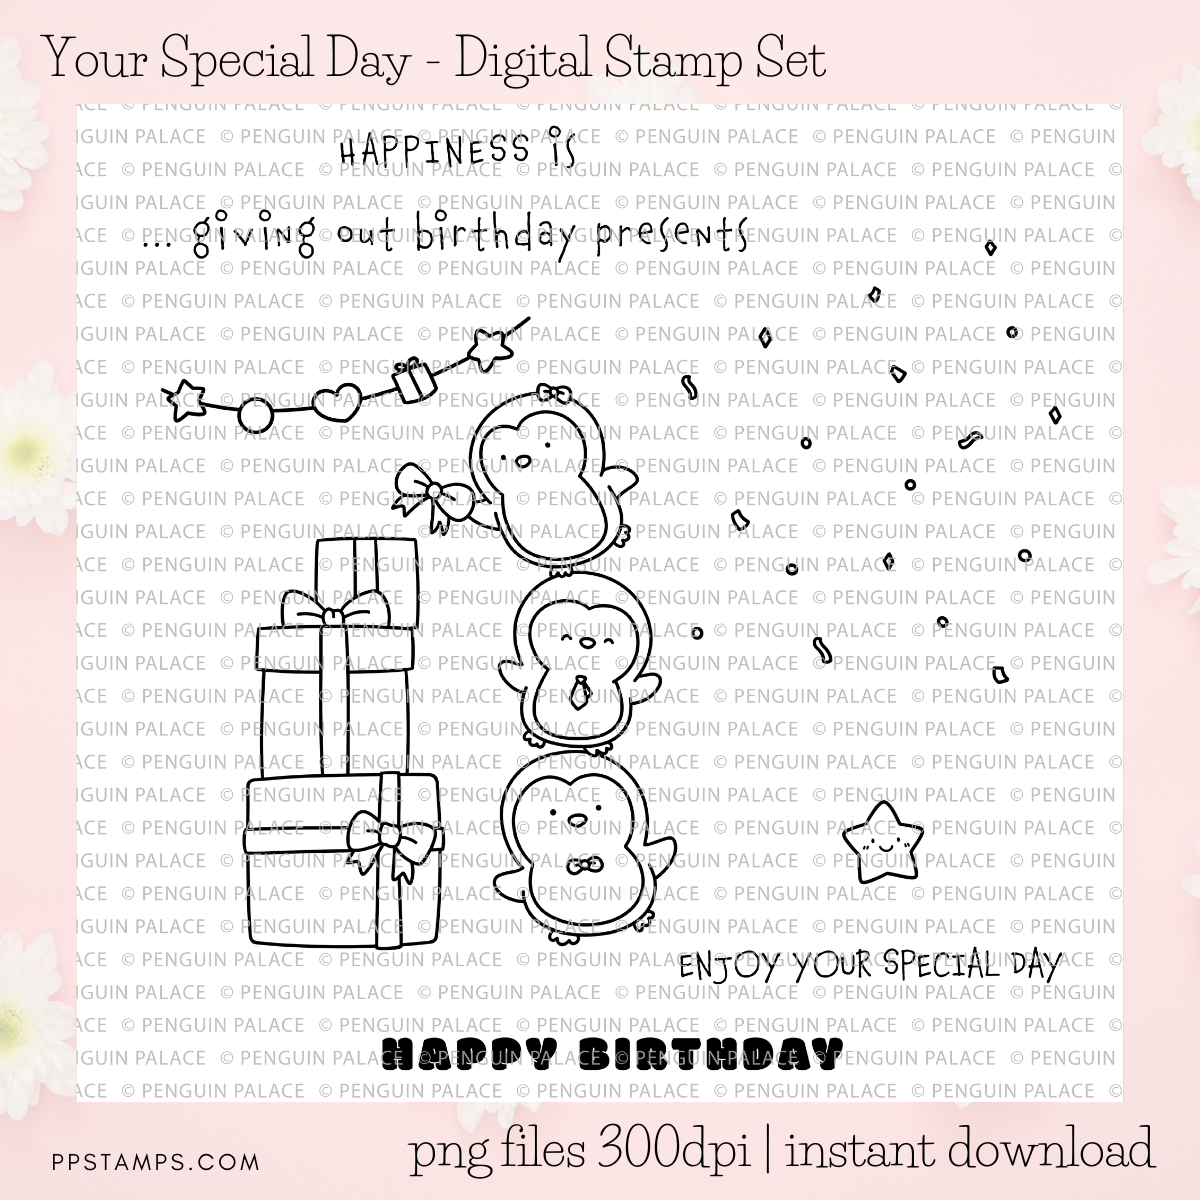 Your Special Day - Digital Stamp